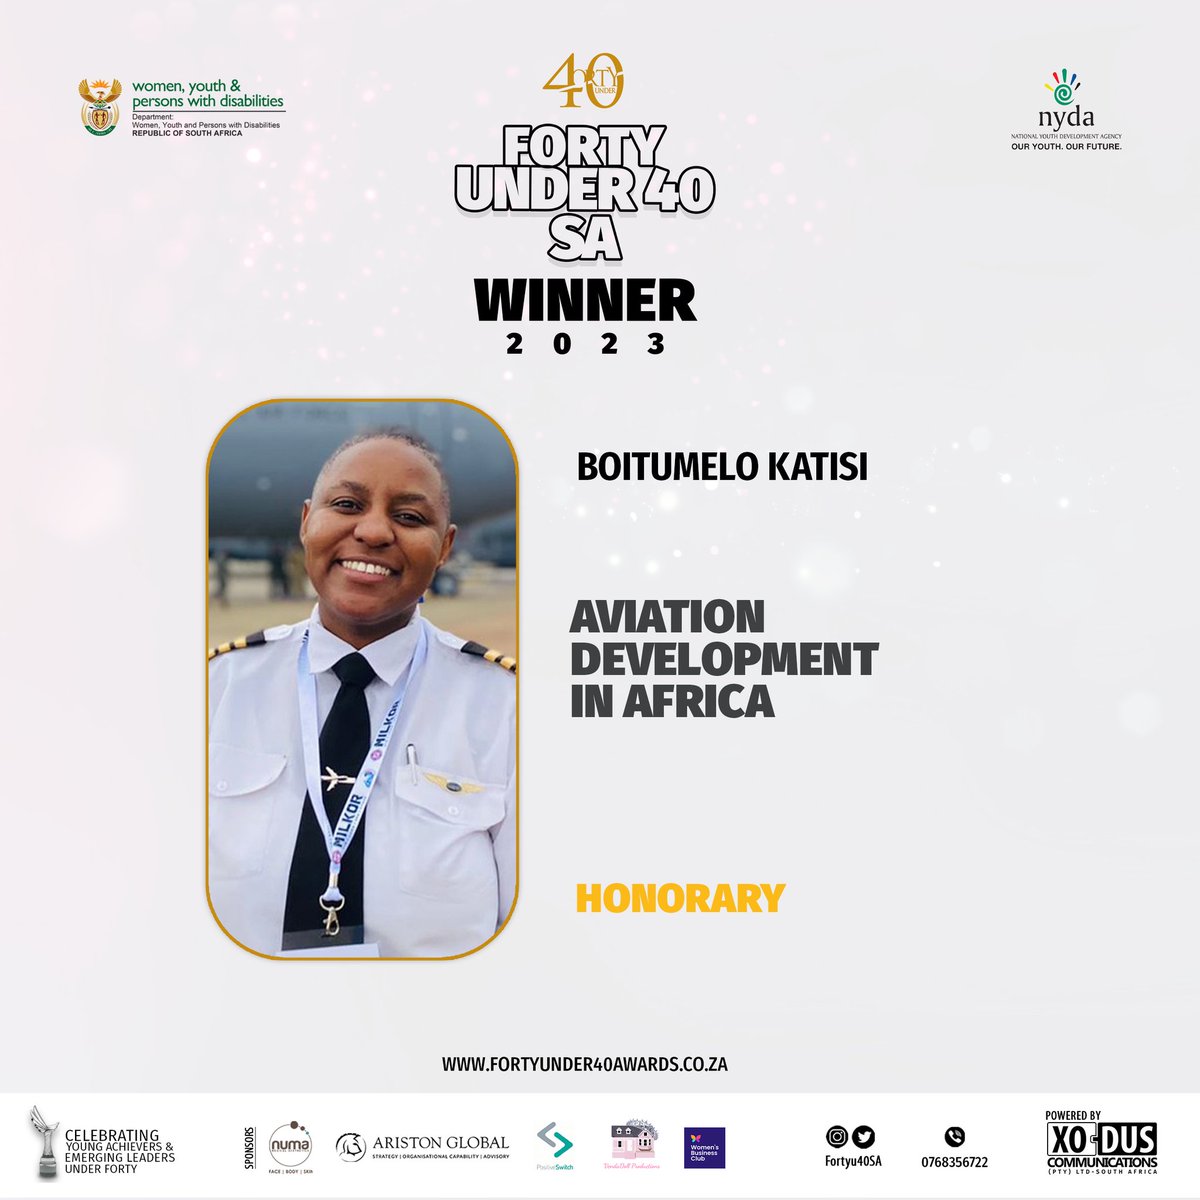 Congratulations to Honorary Award winner of the Forty Under 40 Awards South Africa 2023 The event took place on 9th September 2023 at the Houghton Hotel For more info, visit fortyunder40awards.co.za #FortyUnder40SouthAfrica #spottedunder40